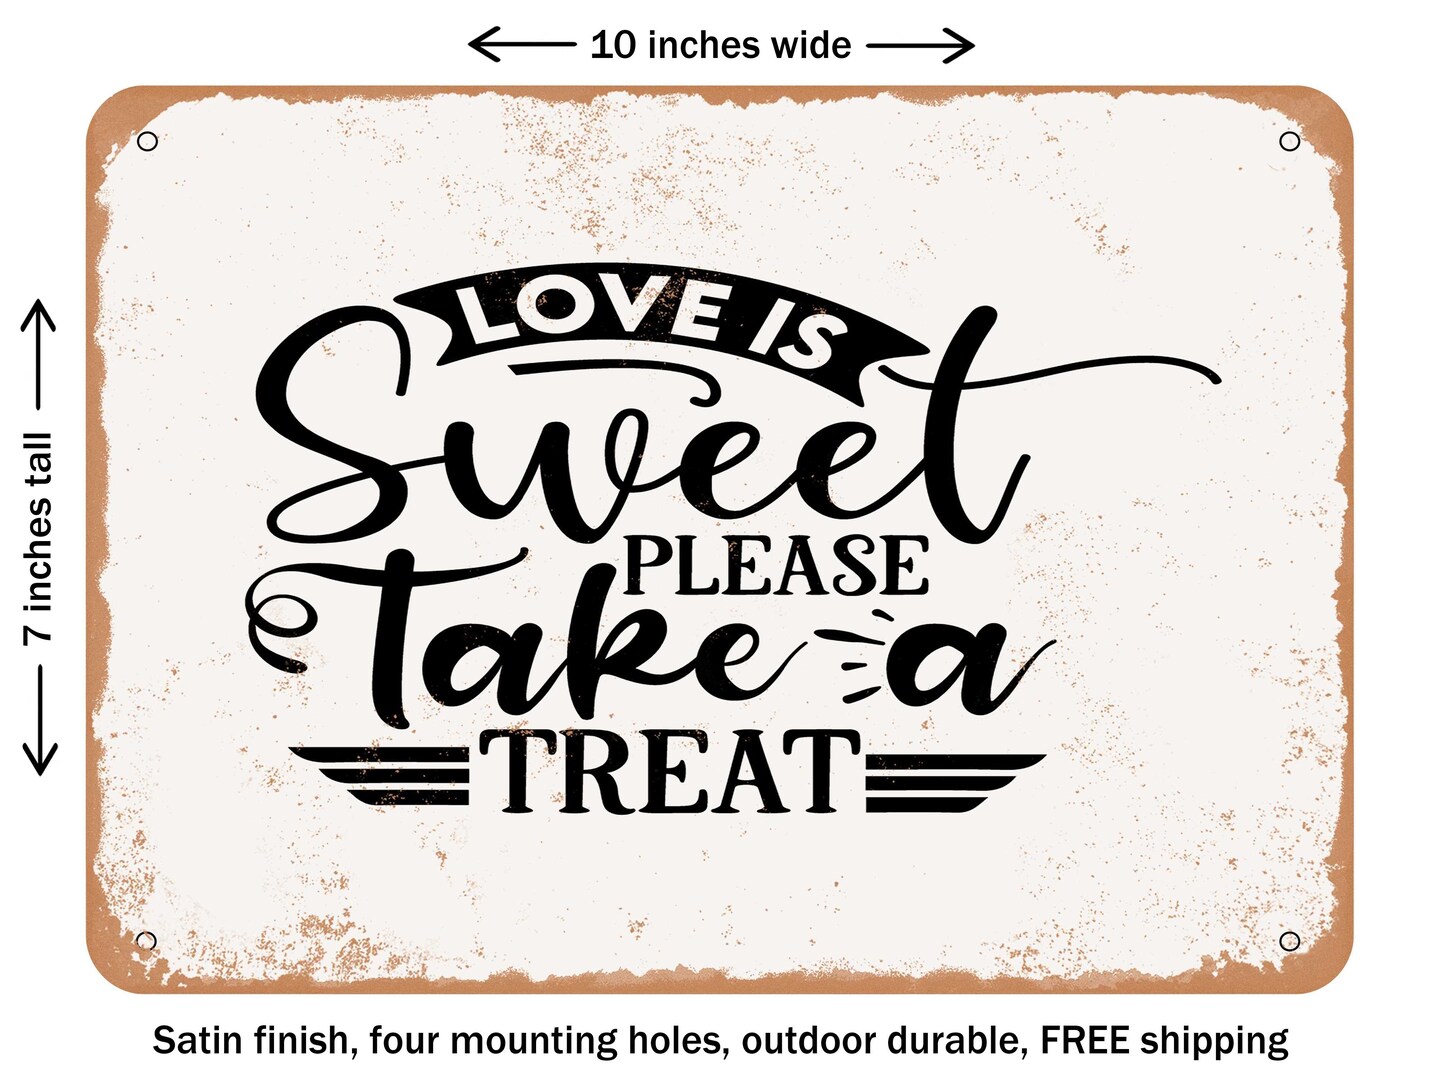 DECORATIVE METAL SIGN - Love is Sweet Please Take a Treat - Vintage Rusty Look